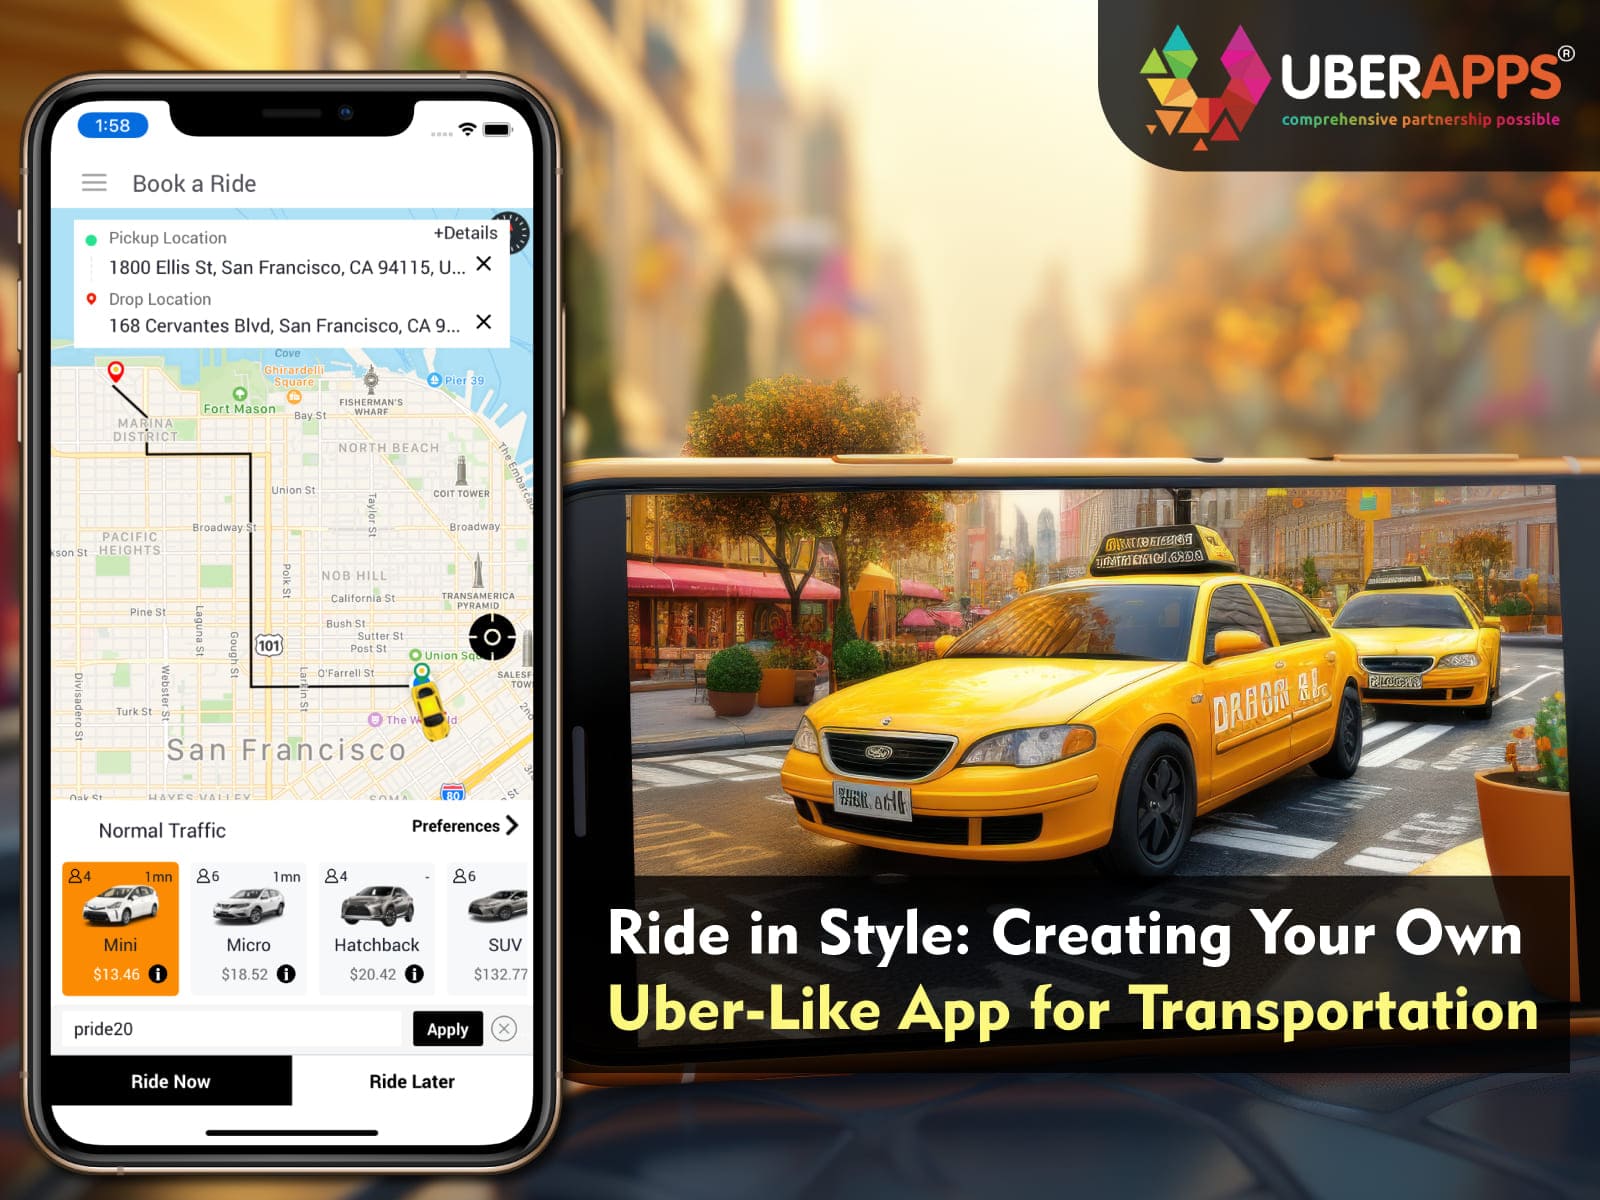 Ride in Style: Creating Your Own Uber-Like App for Transportation